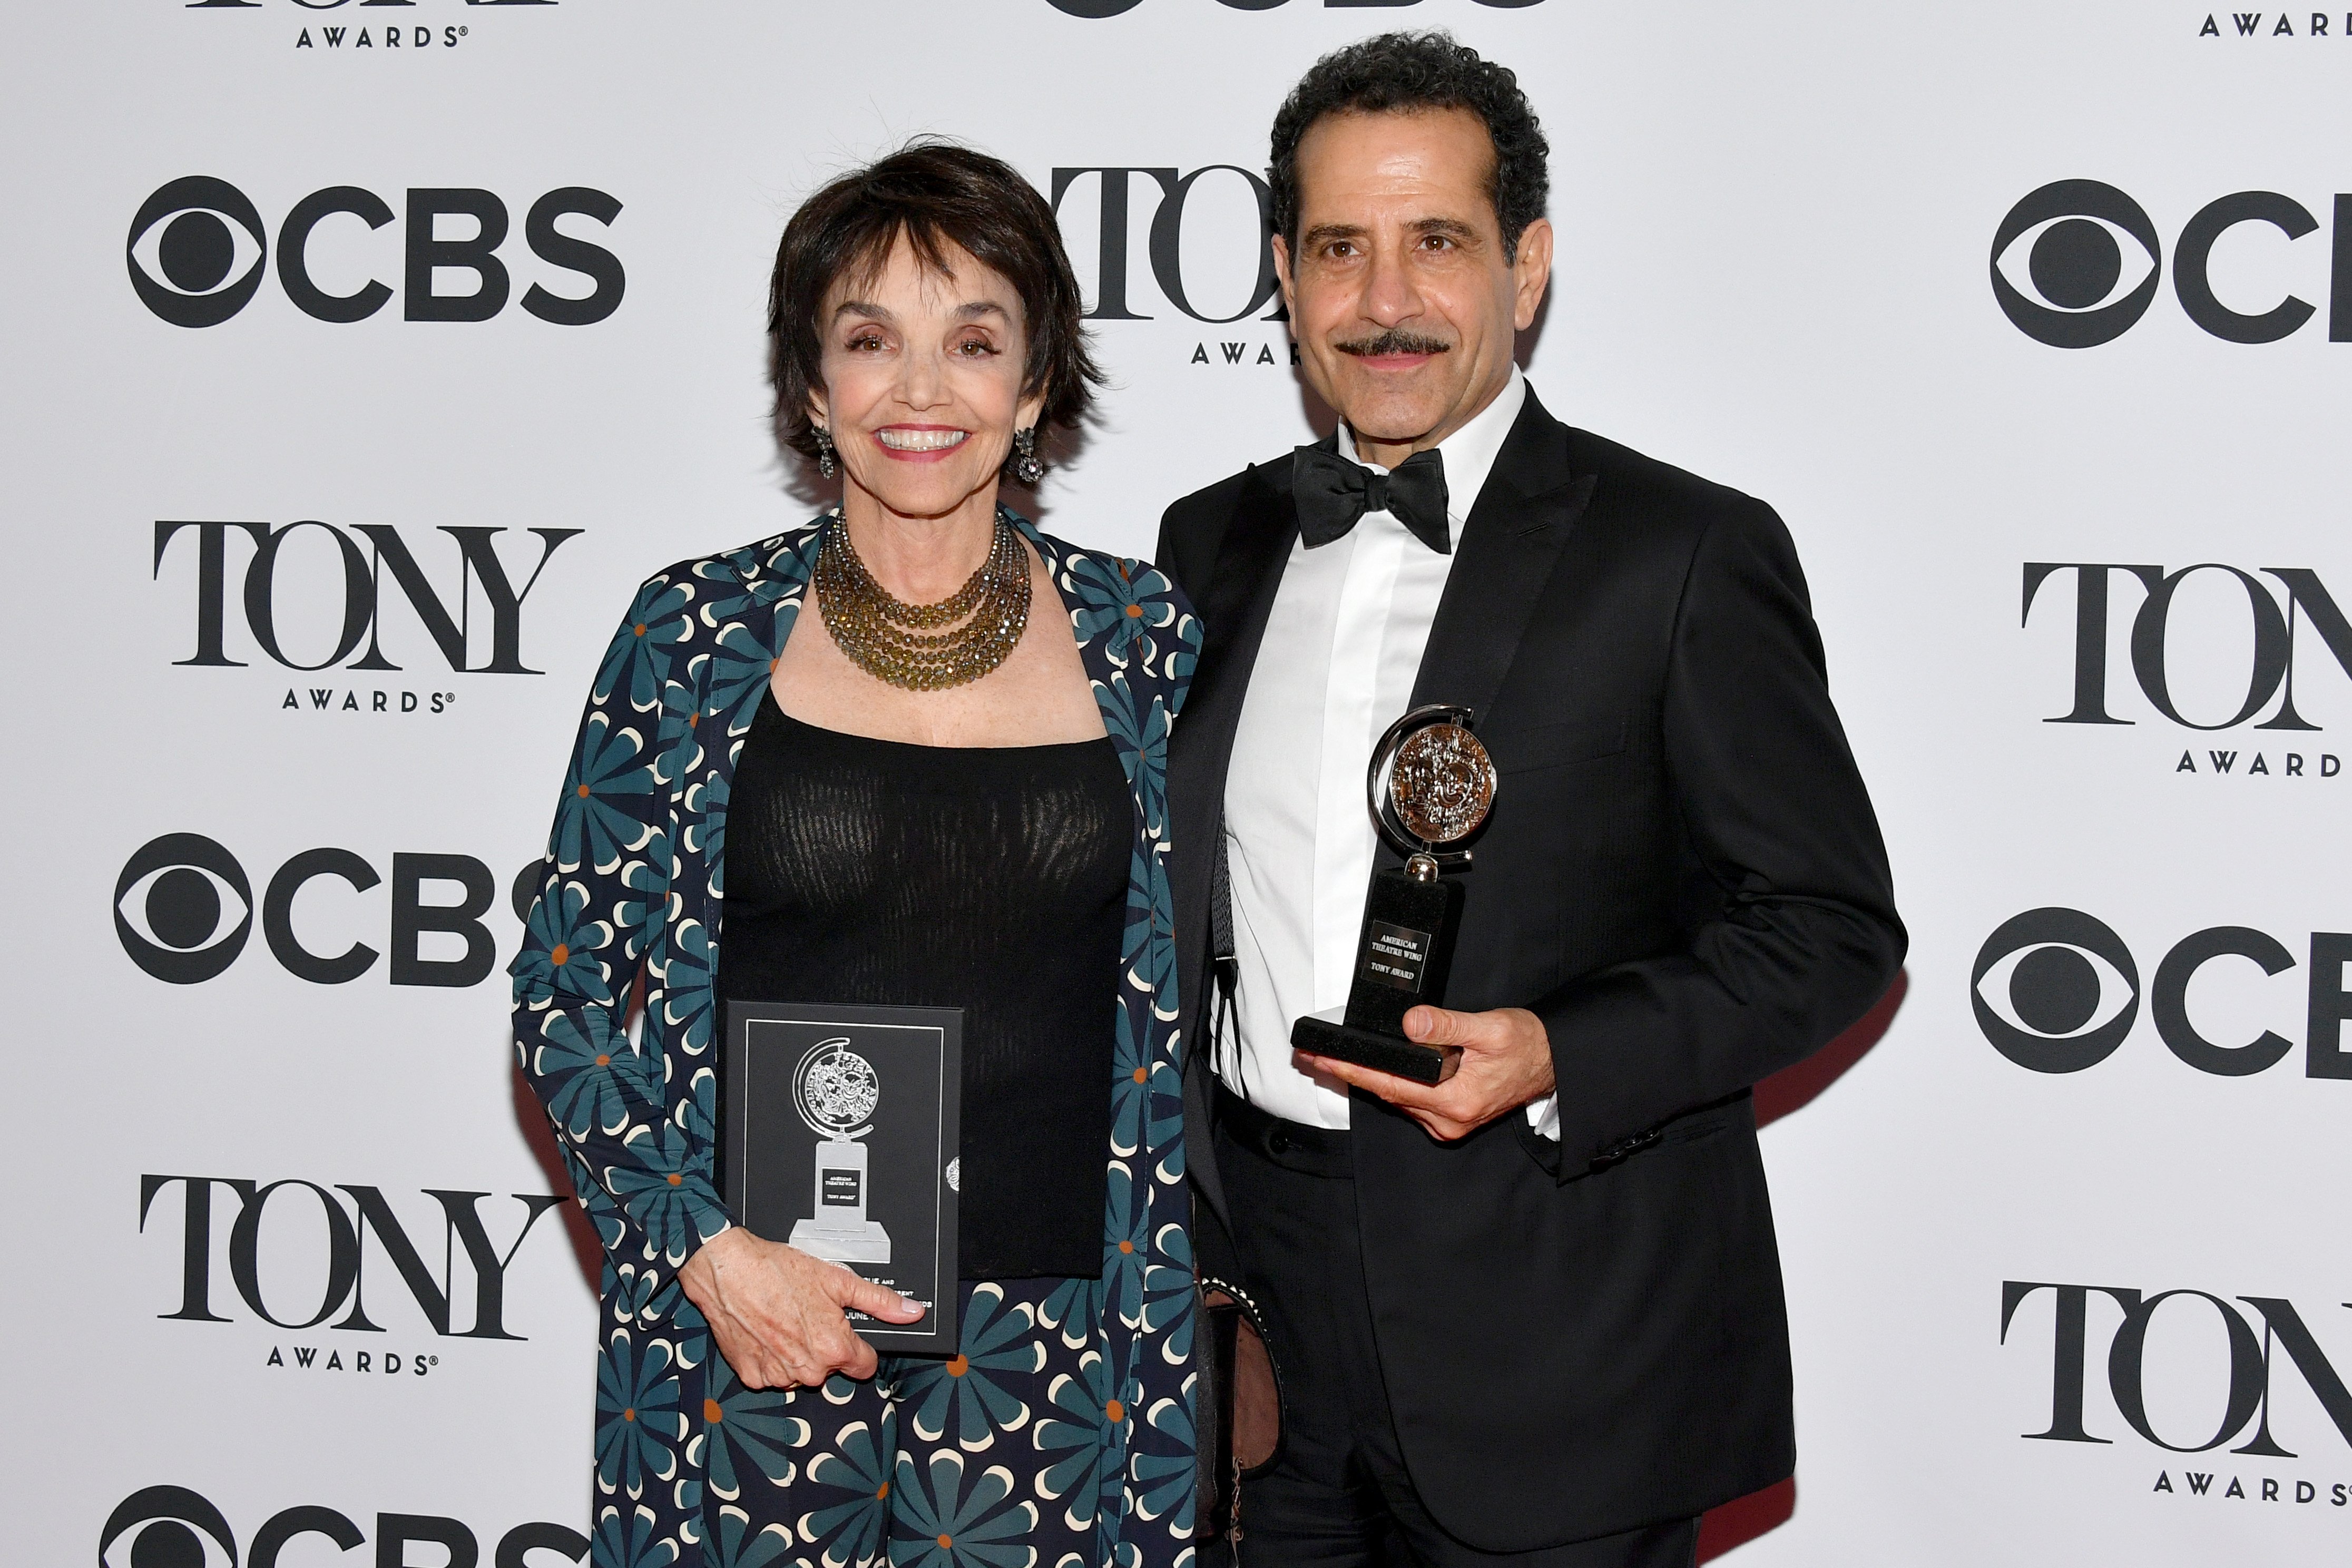 Brooke Adams and Tony Shalhoub attend  the 72nd Annual Tony Awards on June 10, 2018, in New York City. | Source: Getty Images.